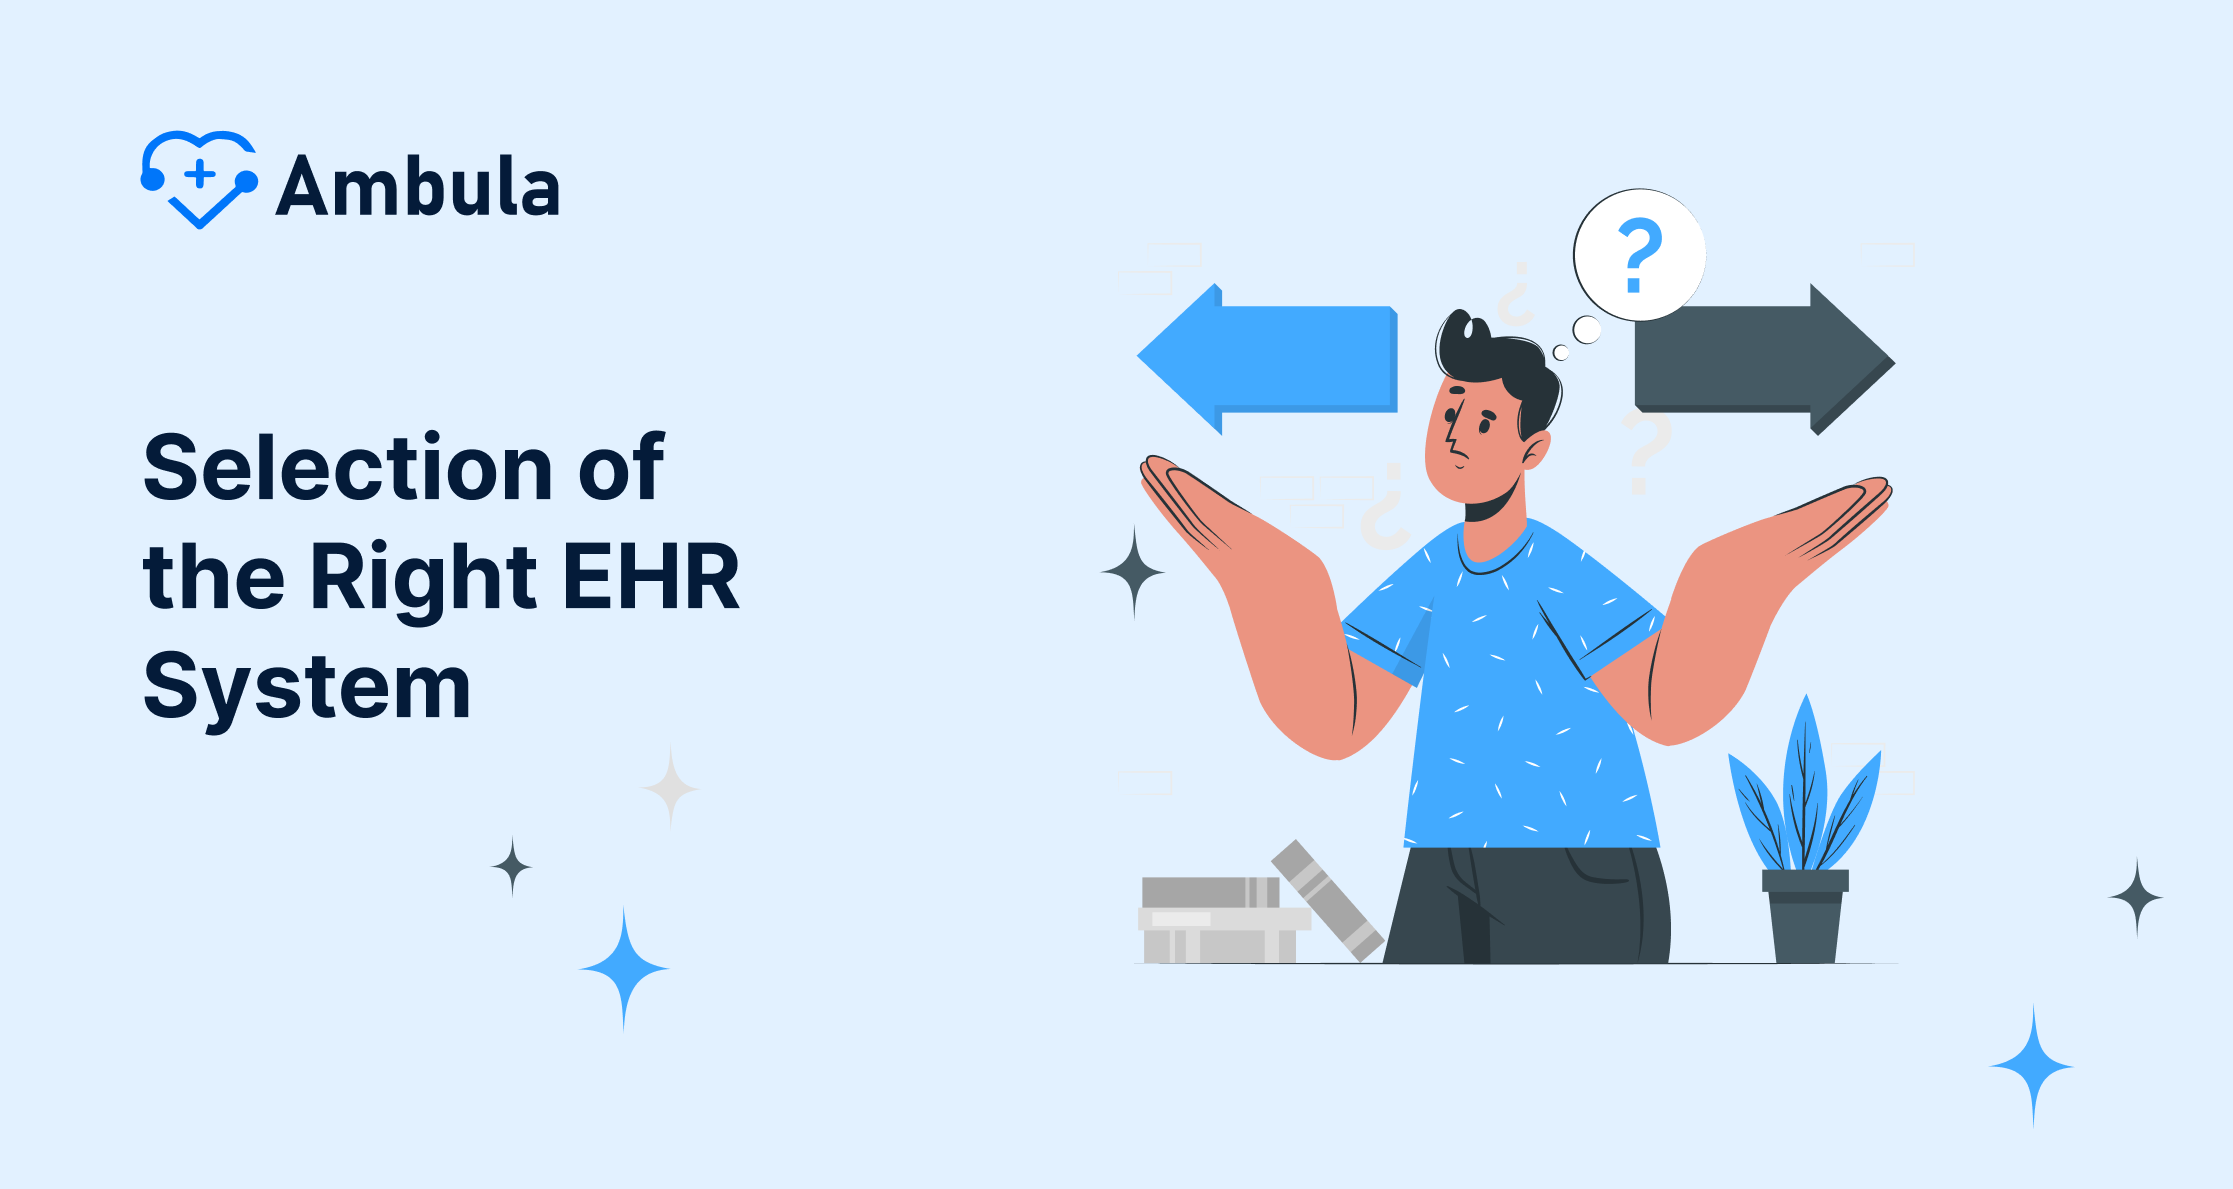 Selection of the Right EHR System